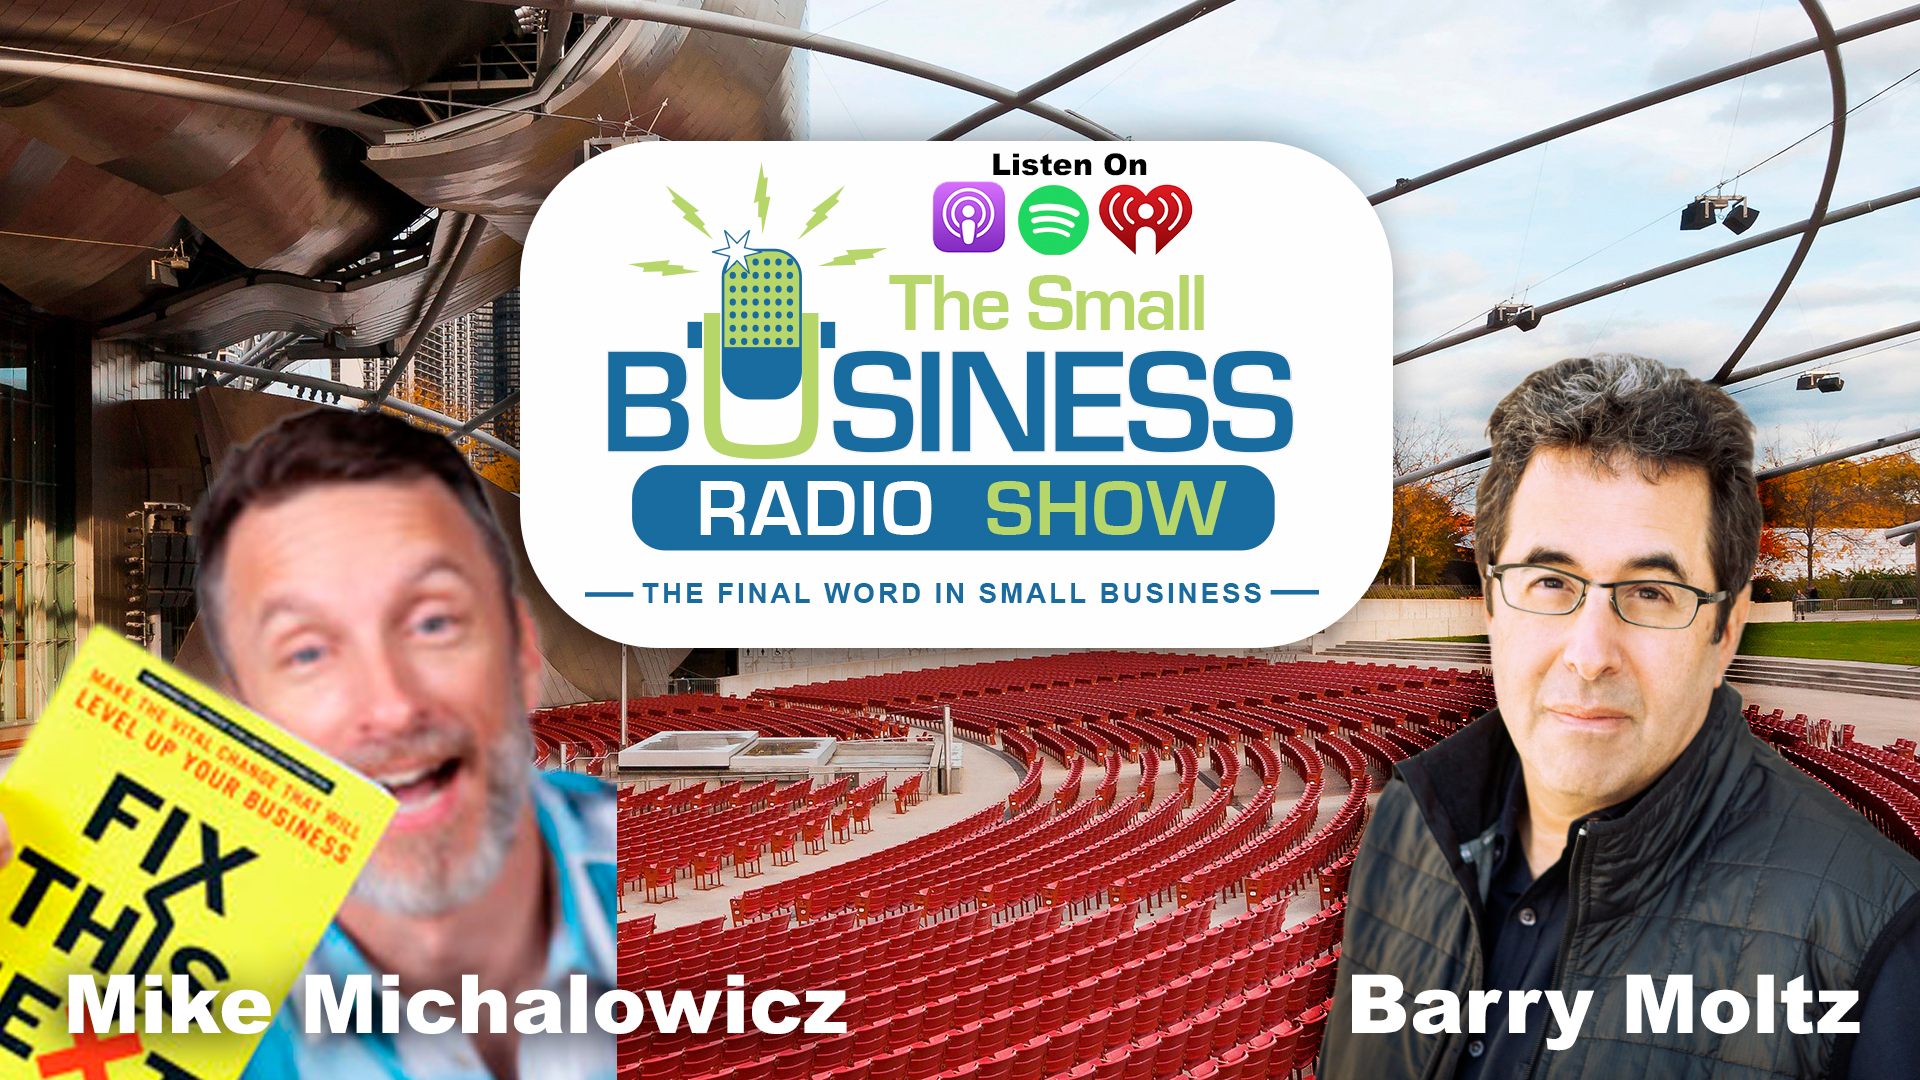 Mike Michalowicz on The Small Business Radio Show